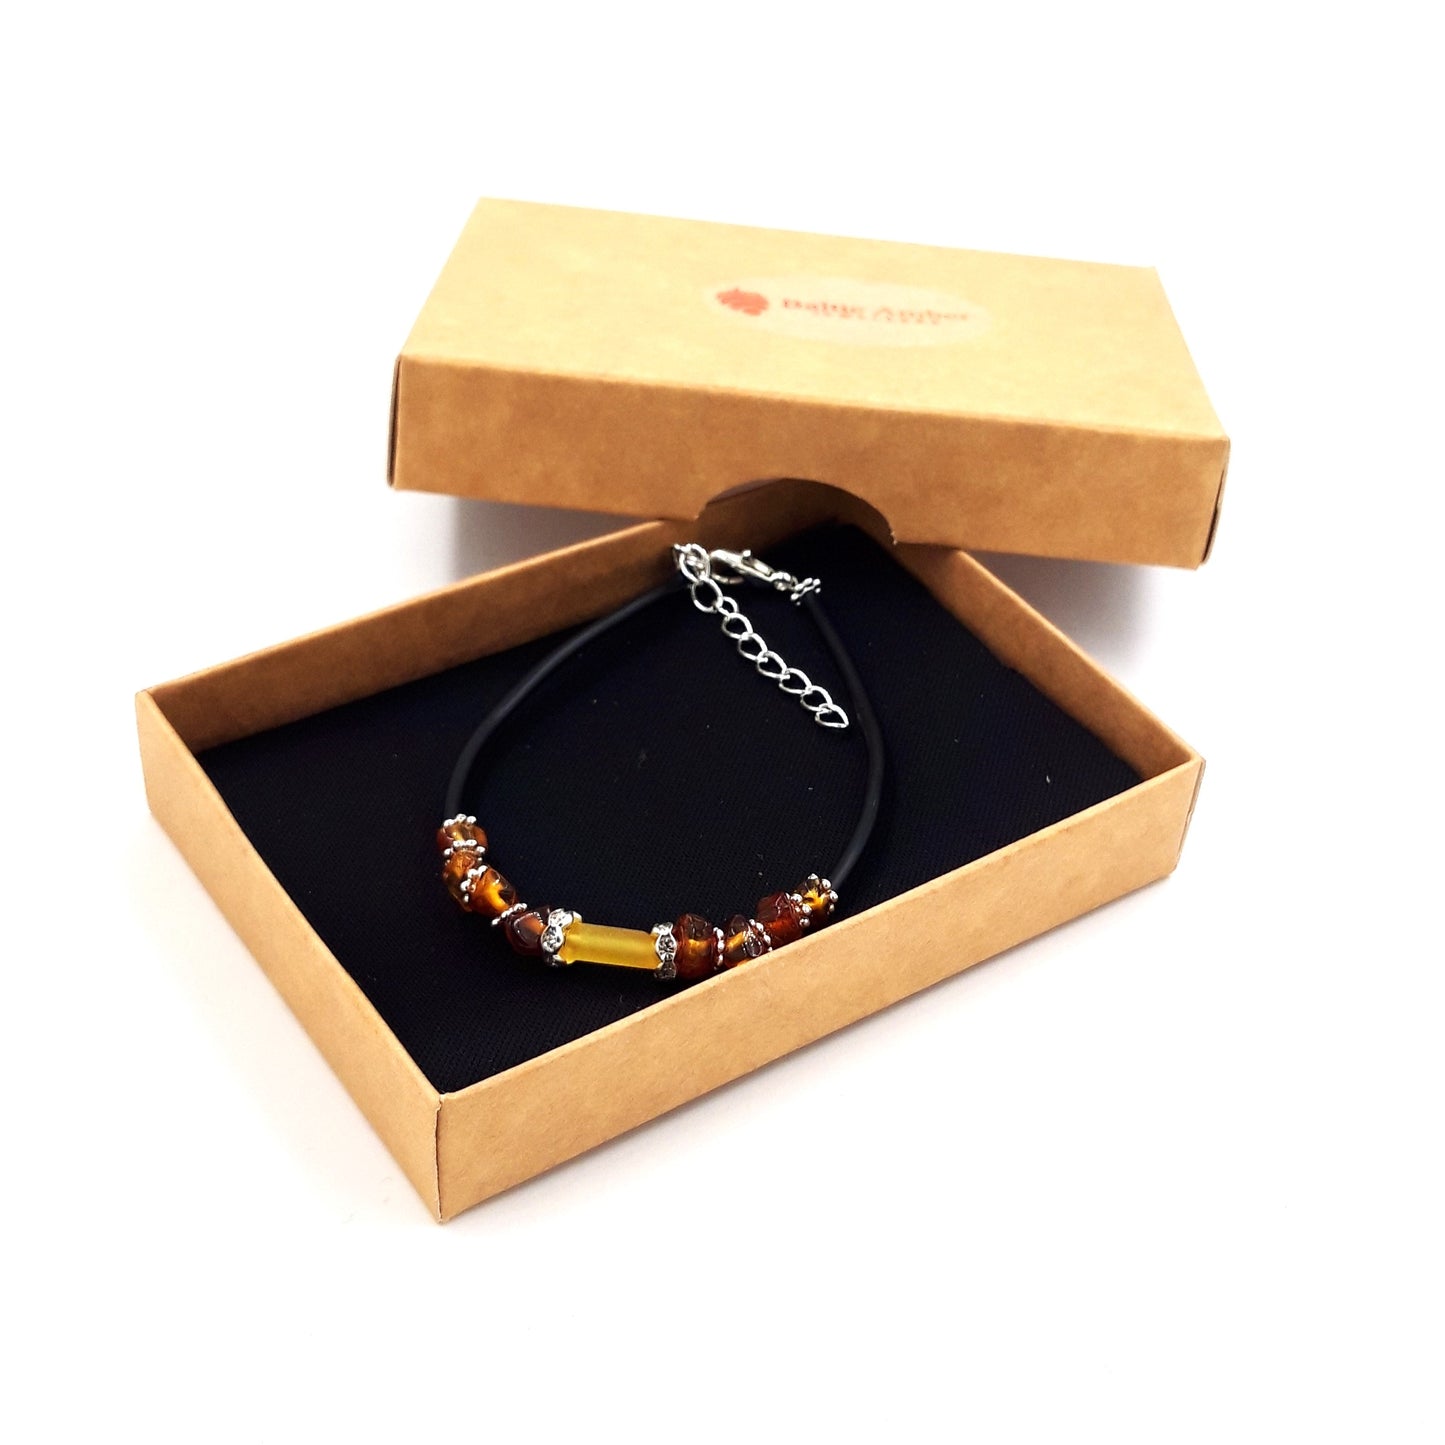 Baltic amber bracelet for adults 1, 10, 50 and 100 units